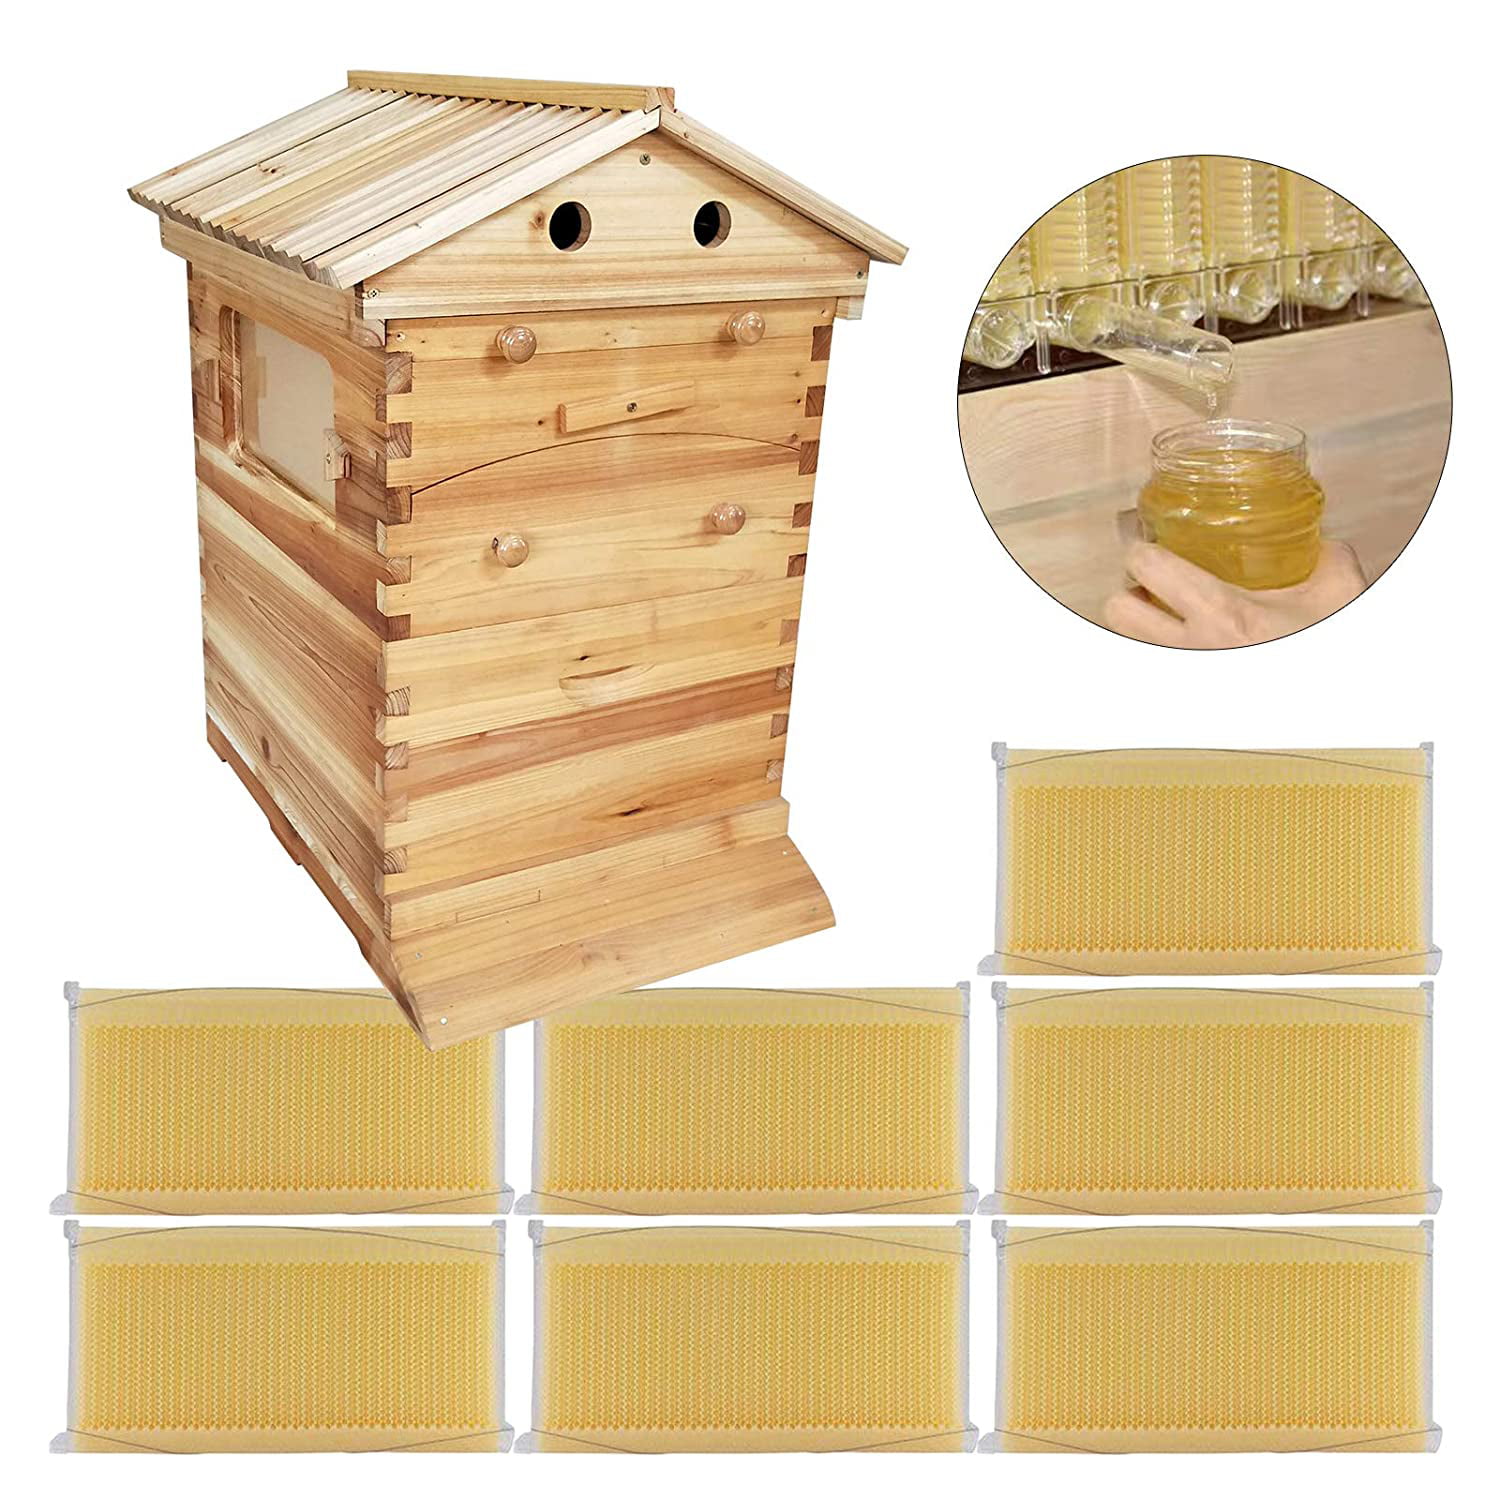 Details about   Auto Honey Beekeeping Wooden House Beehive Boxes 7Pcs Auto Beehive Frame Comb 